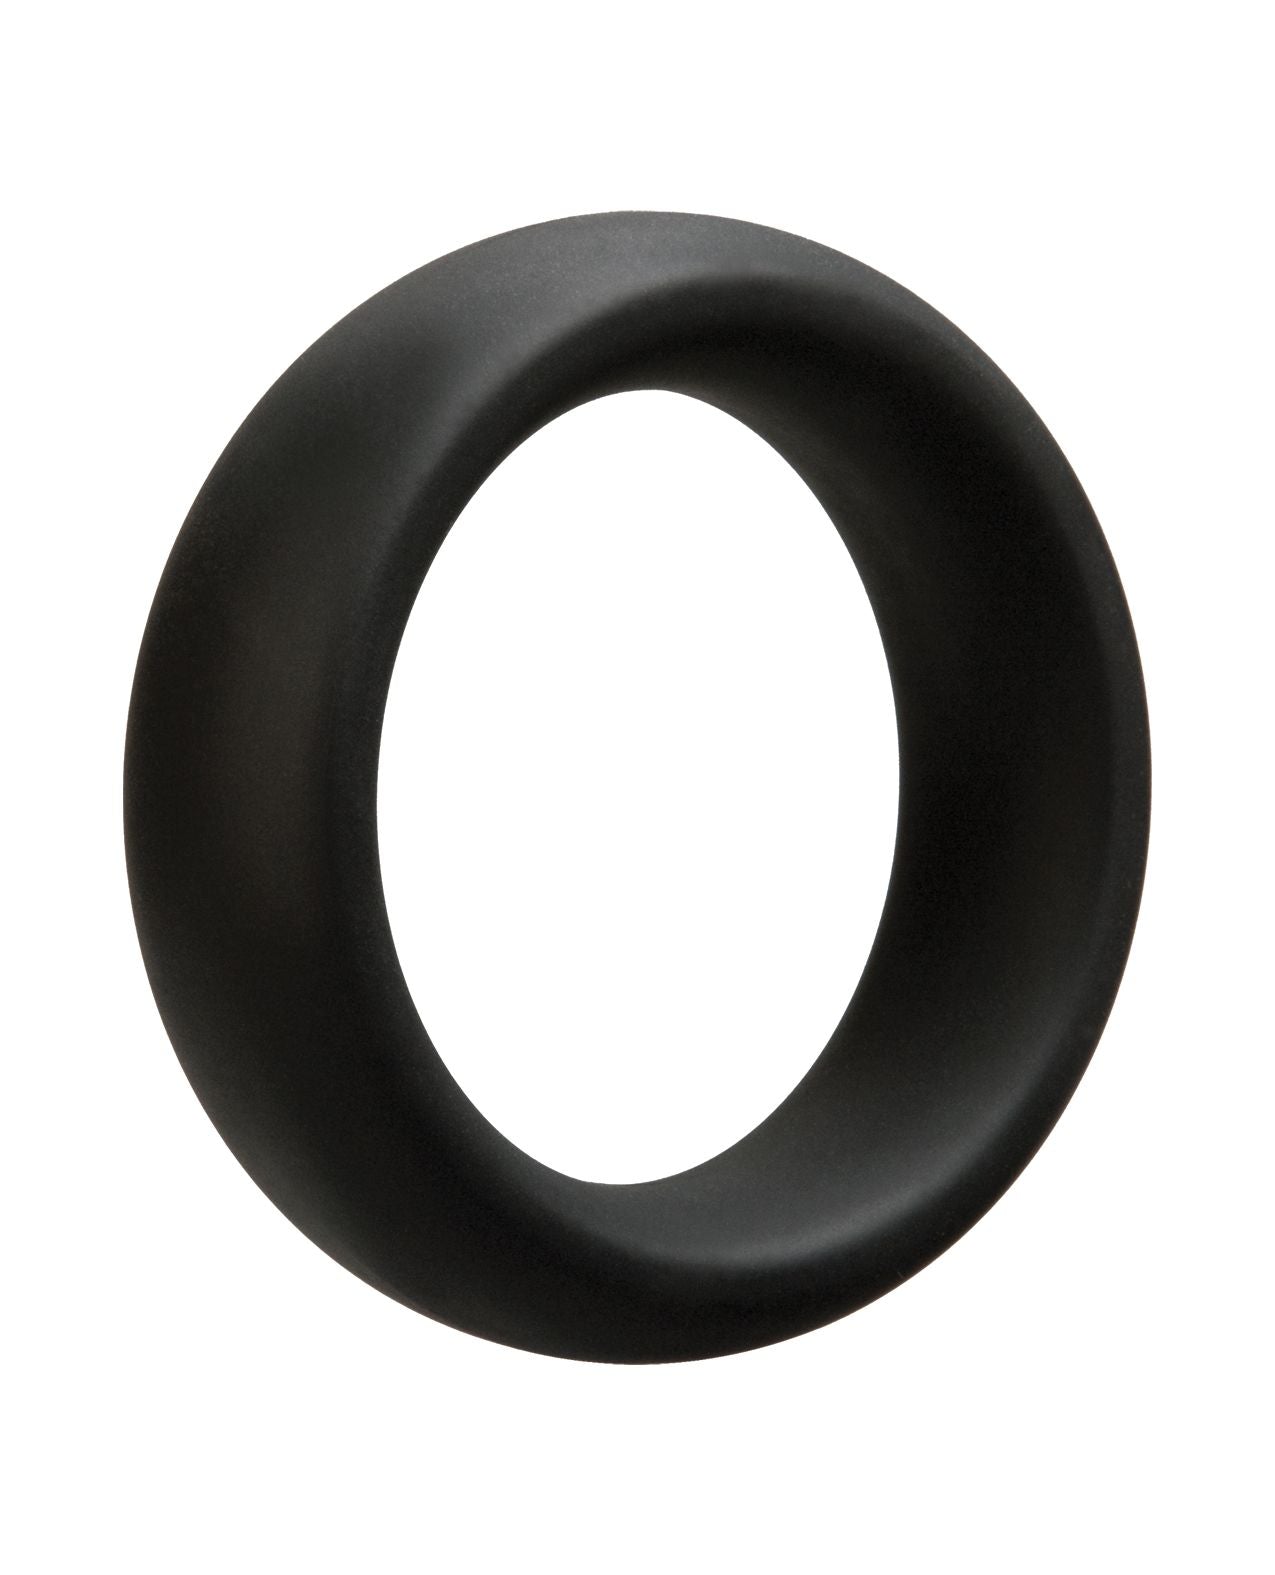 OptiMale C Ring Thick - 45 mm Black Shipmysextoys